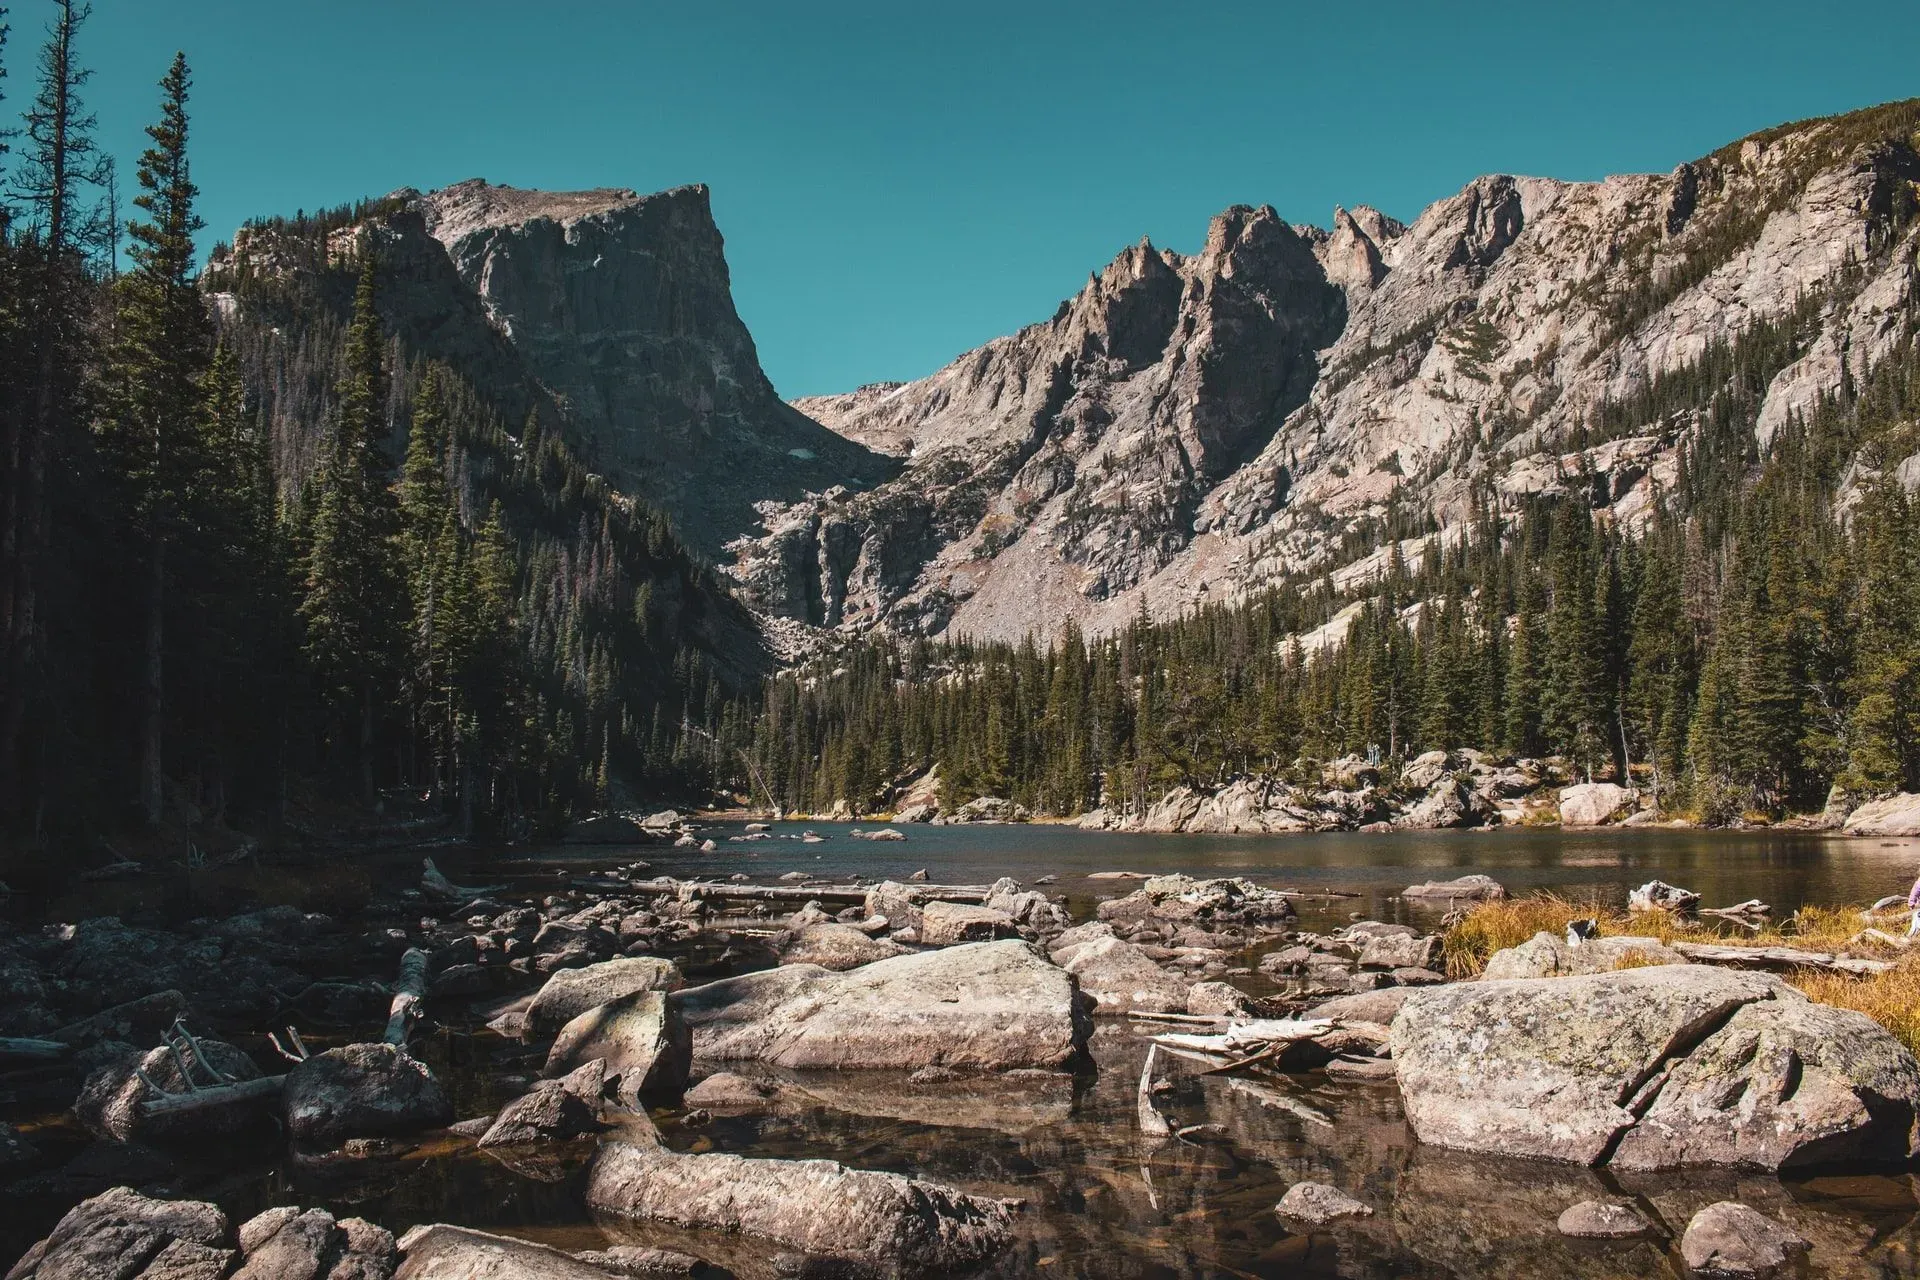 The Rocky Mountain area is home to many large geographical features, including the Rocky Mountains themselves. Learn more about the highest mountain in the Rocky Mountains here.